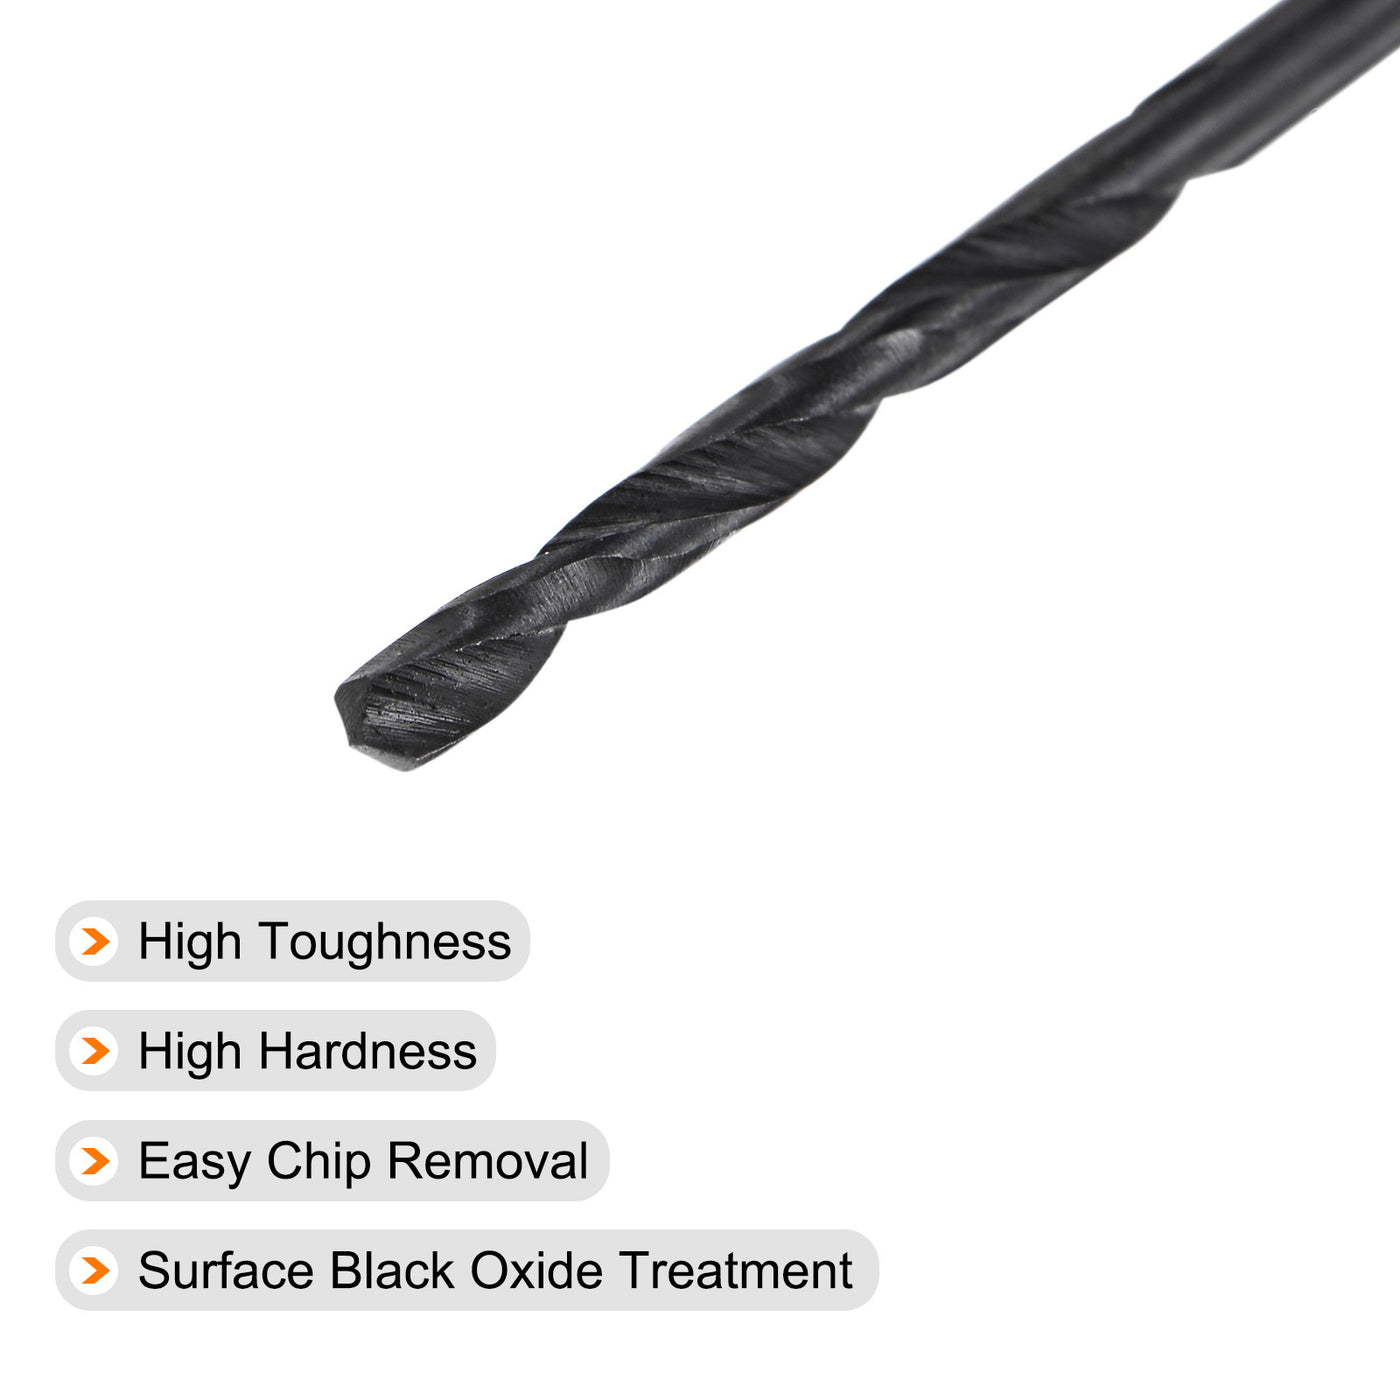 uxcell Uxcell High Speed Steel Twist Drill Bit, 1.8mm Fully Ground Black Oxide 44mm Long 10Pcs